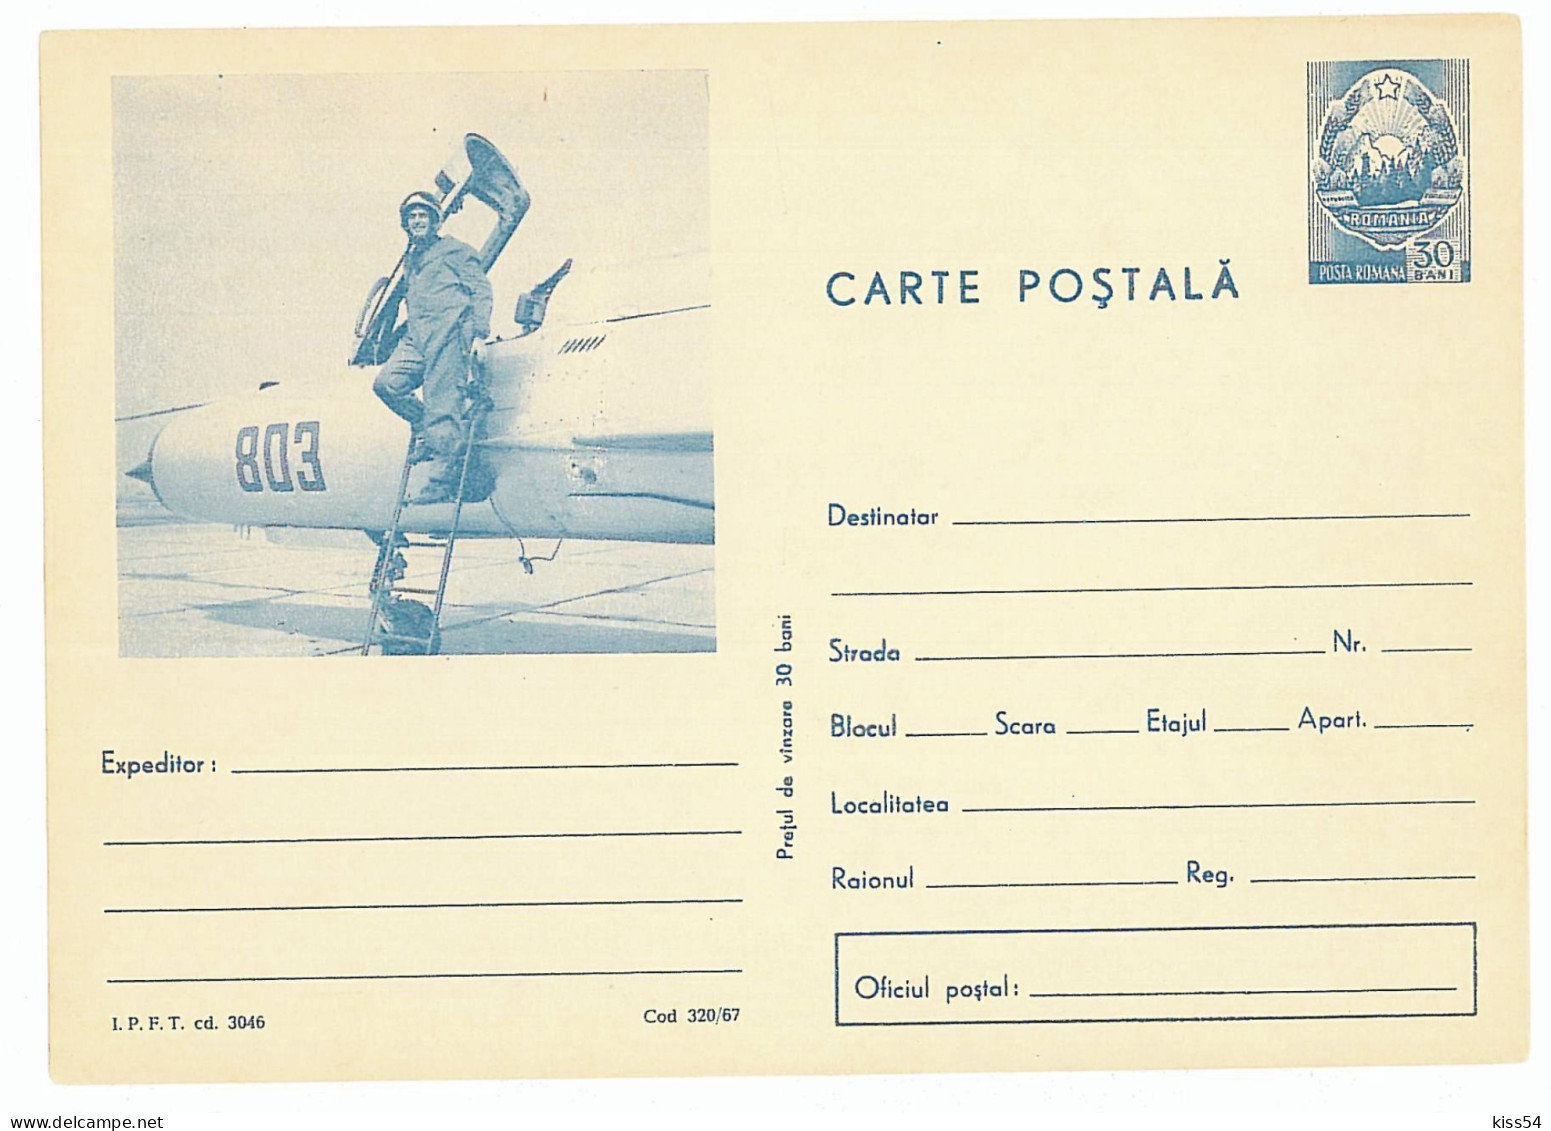 IP 67 - 320 AIRCRAFT And PILOT, Romania - Stationery - Unused - 1967 - Ganzsachen